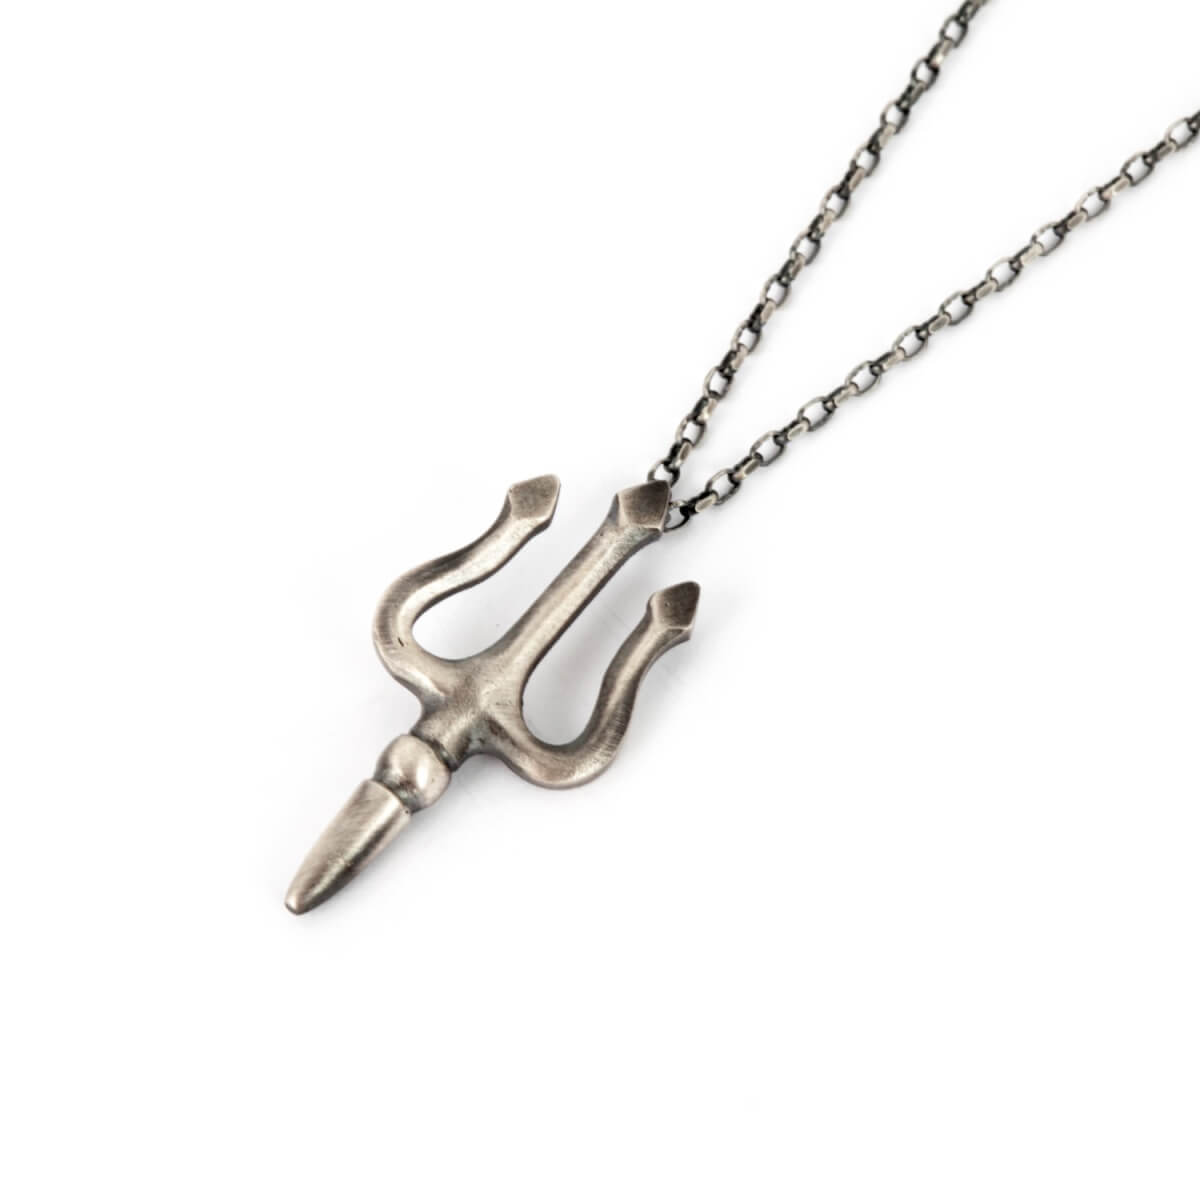 Men's Sterling Silver Trident Necklace Pendant Tomerm Jewelry